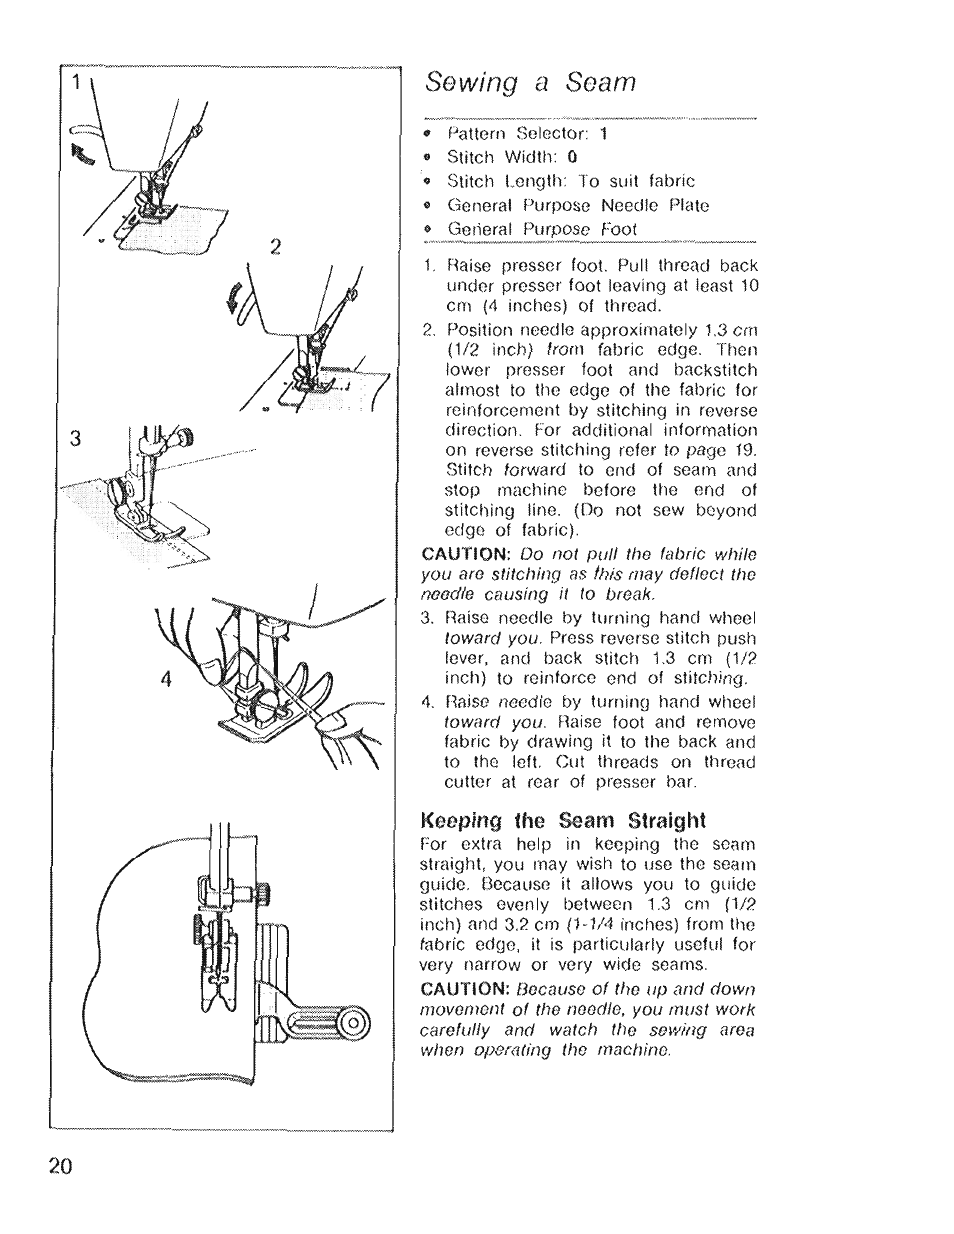 Sewing a seam | SINGER 4022 User Manual | Page 22 / 56